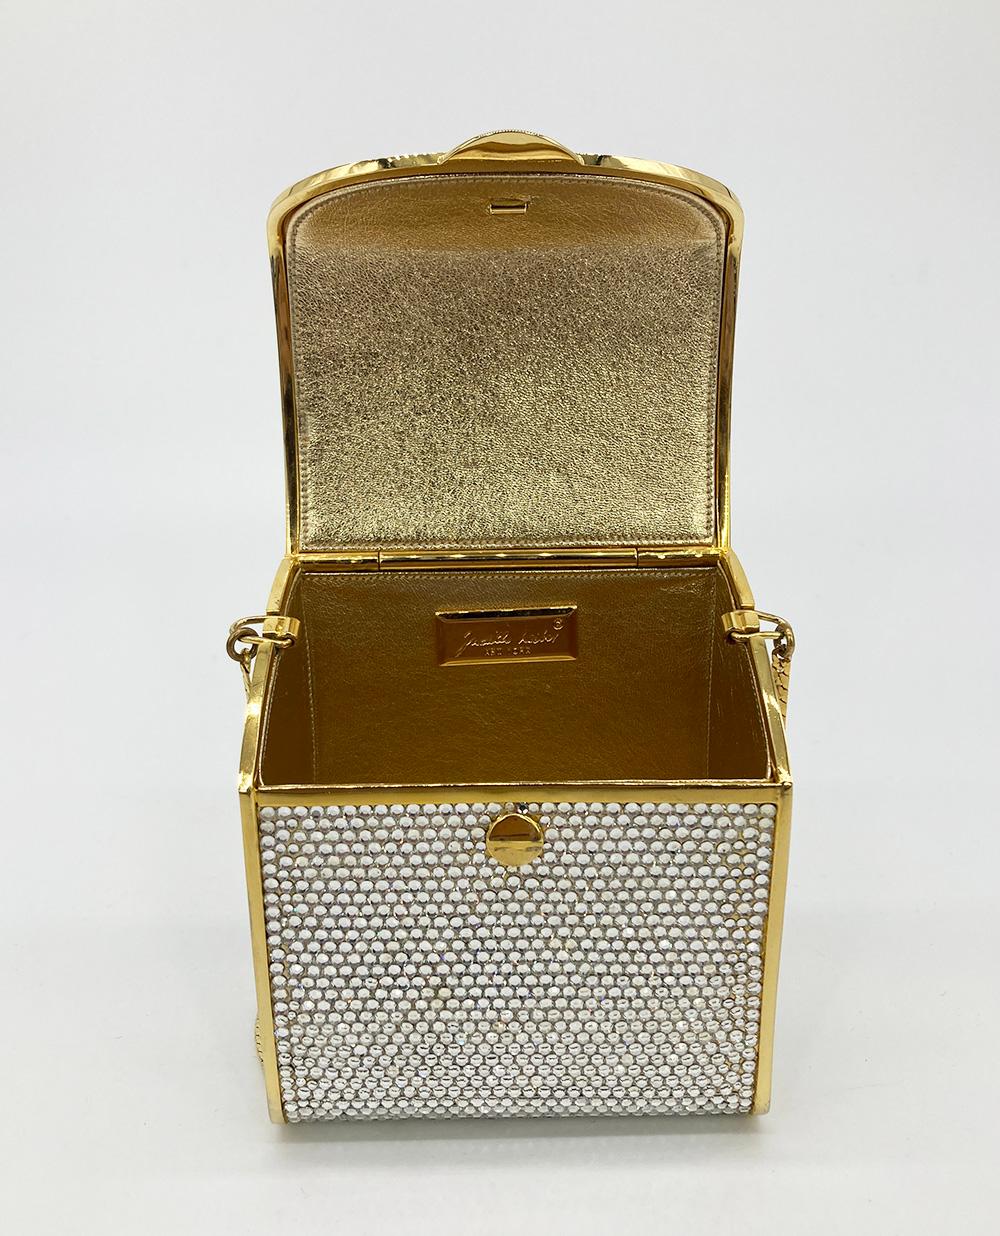 Vintage Judith Leiber Top Flap Crystal Shoulder Bag Minaudiere In Excellent Condition For Sale In Philadelphia, PA